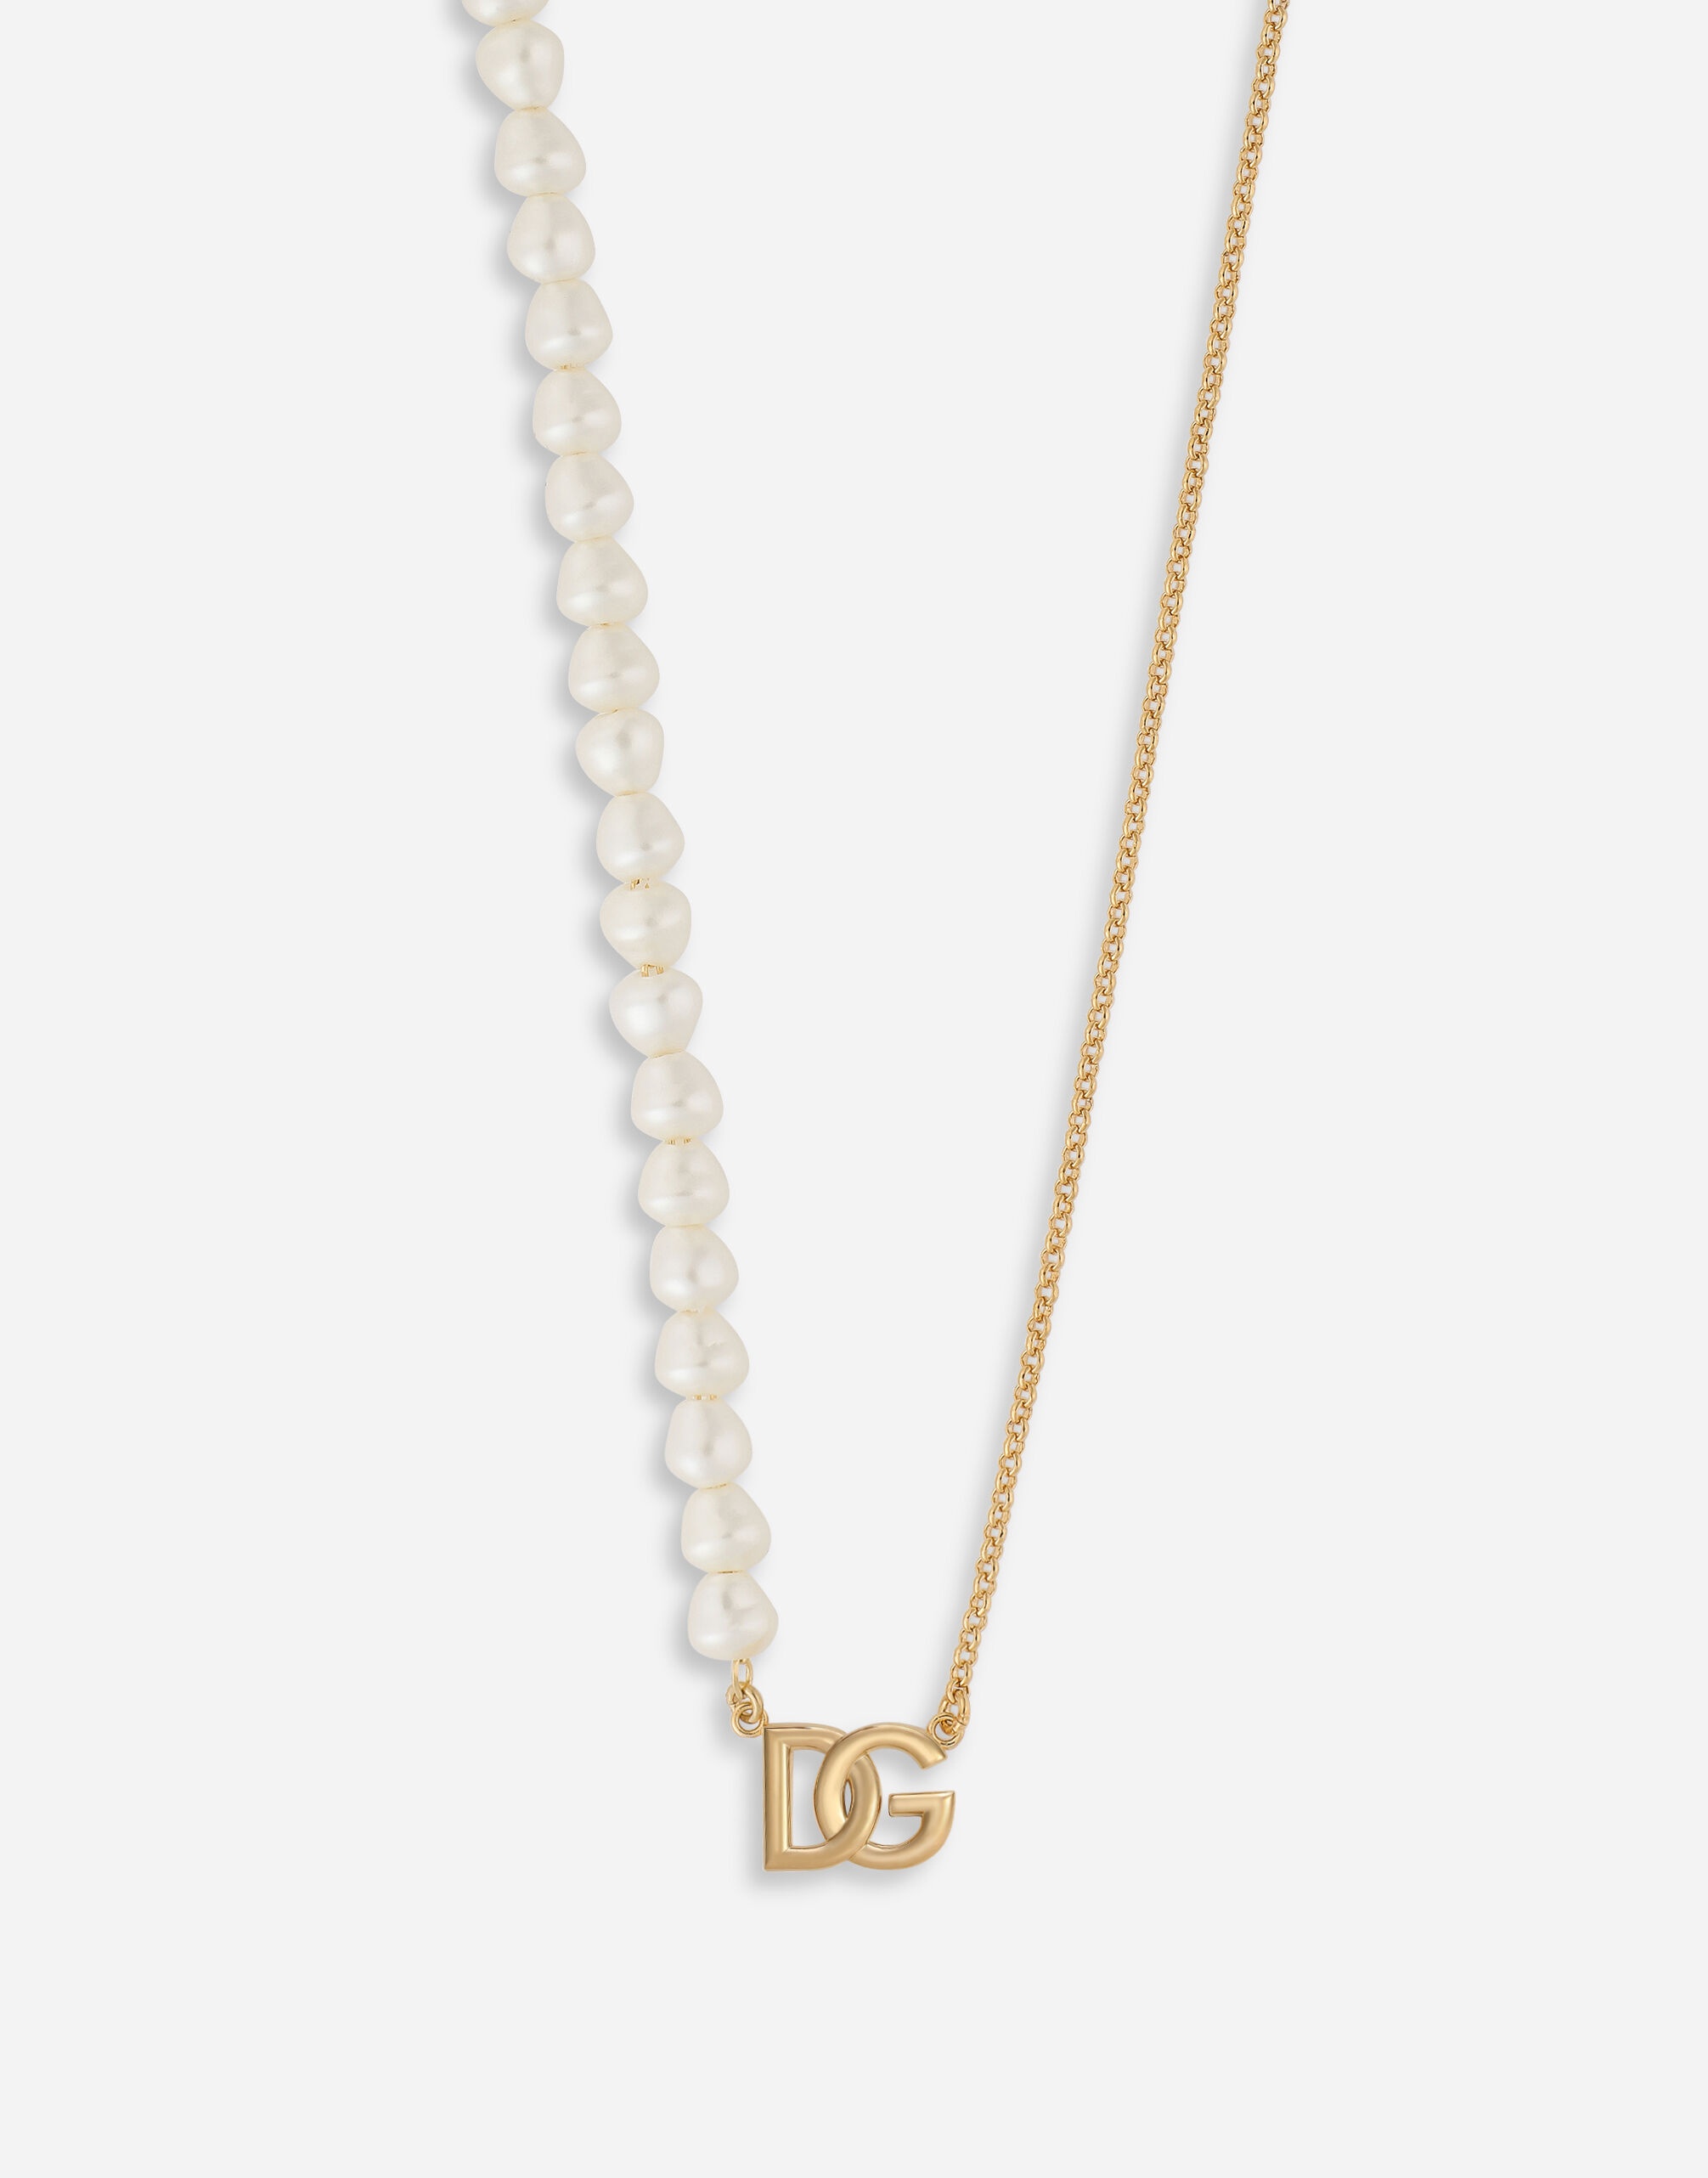 Necklace with pearls and DG logo - 2